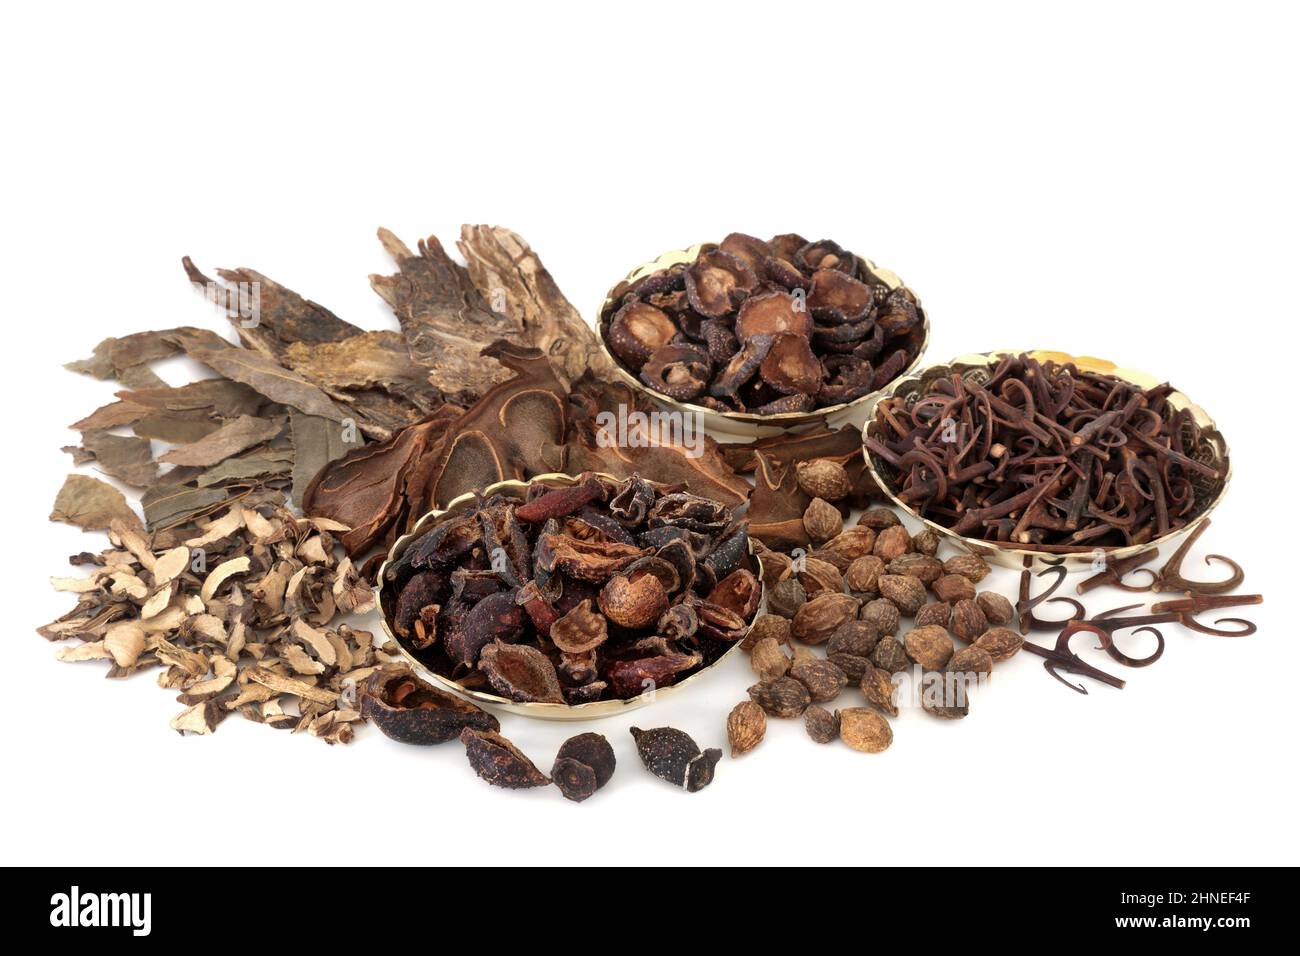 Chinese herbal medicine with herbs and spice used in ancient and traditional healing remedies. Natural plant medicine. On white background. Stock Photo